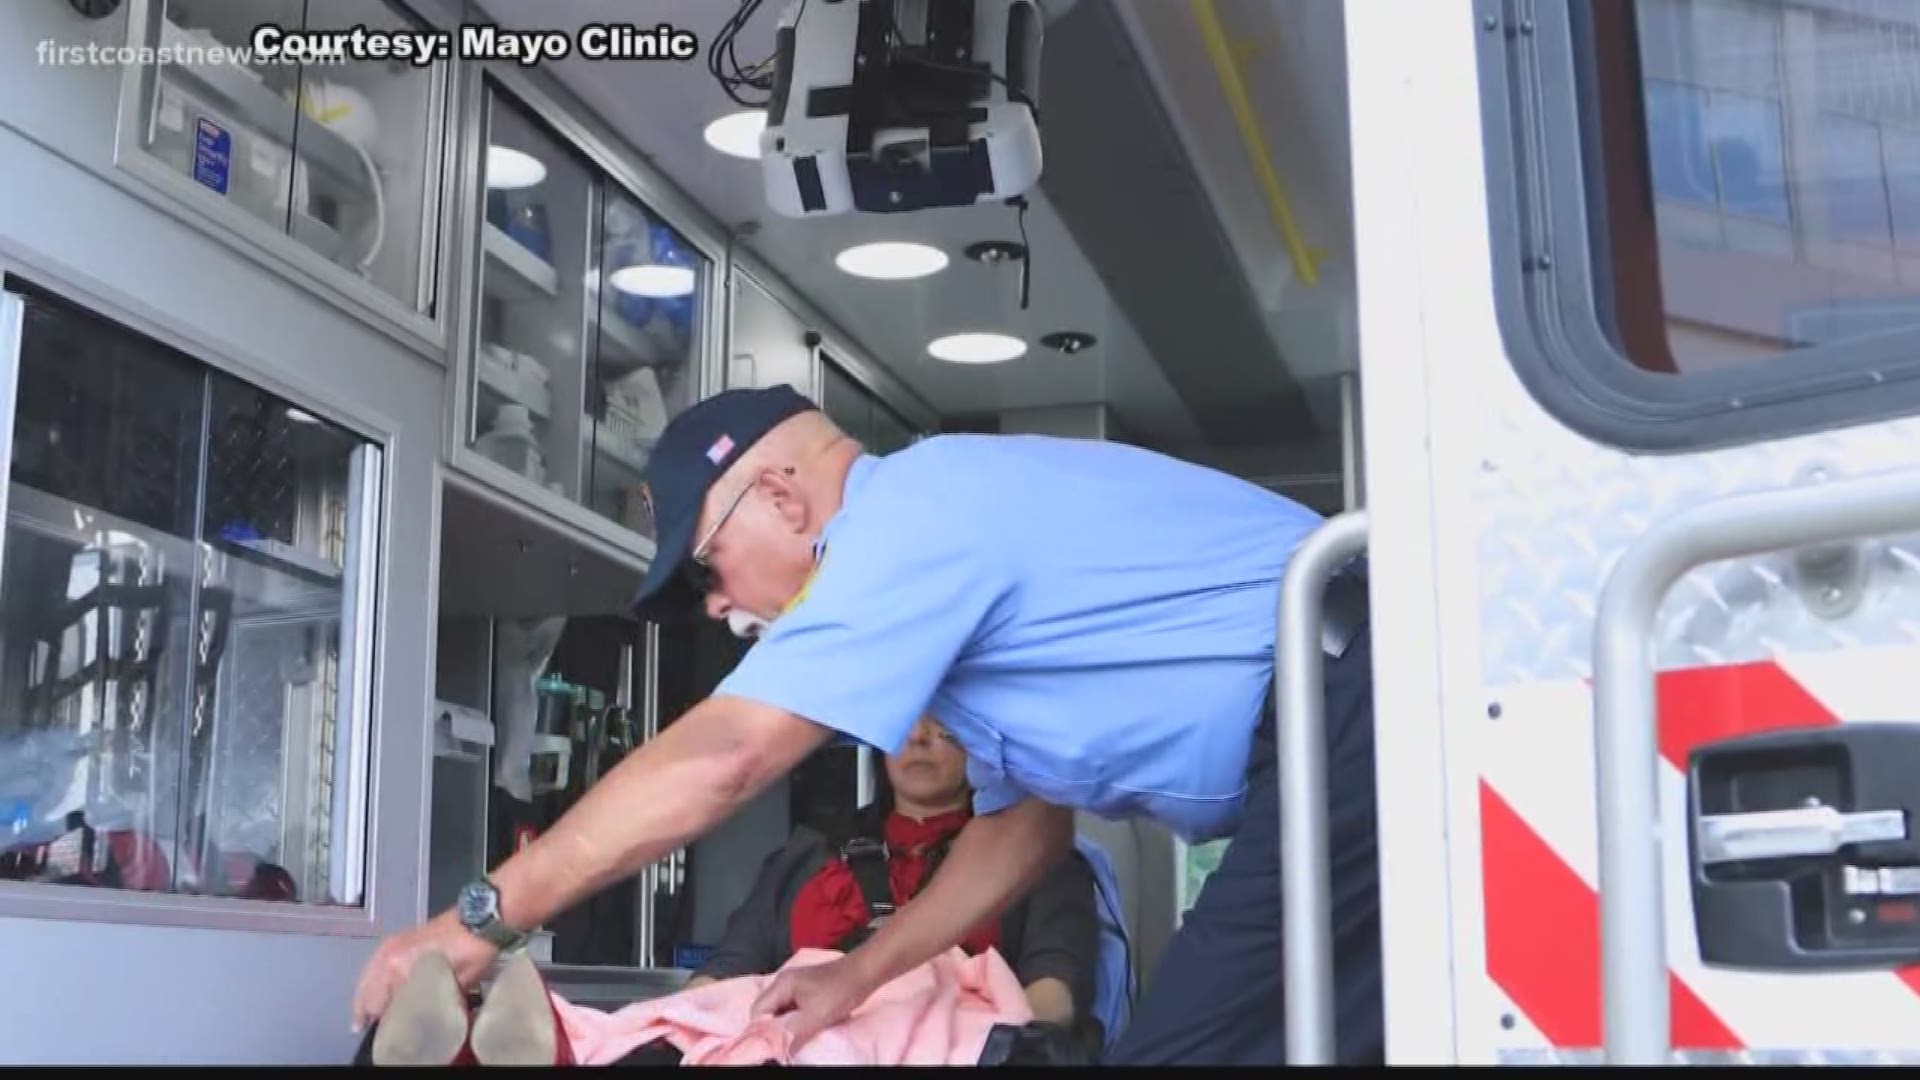 About 800,000 people in the U.S. have a stroke each year. Those people could have better outcomes thanks to the new Mobile Telestroke Program with Mayo Clinic and Century Ambulance